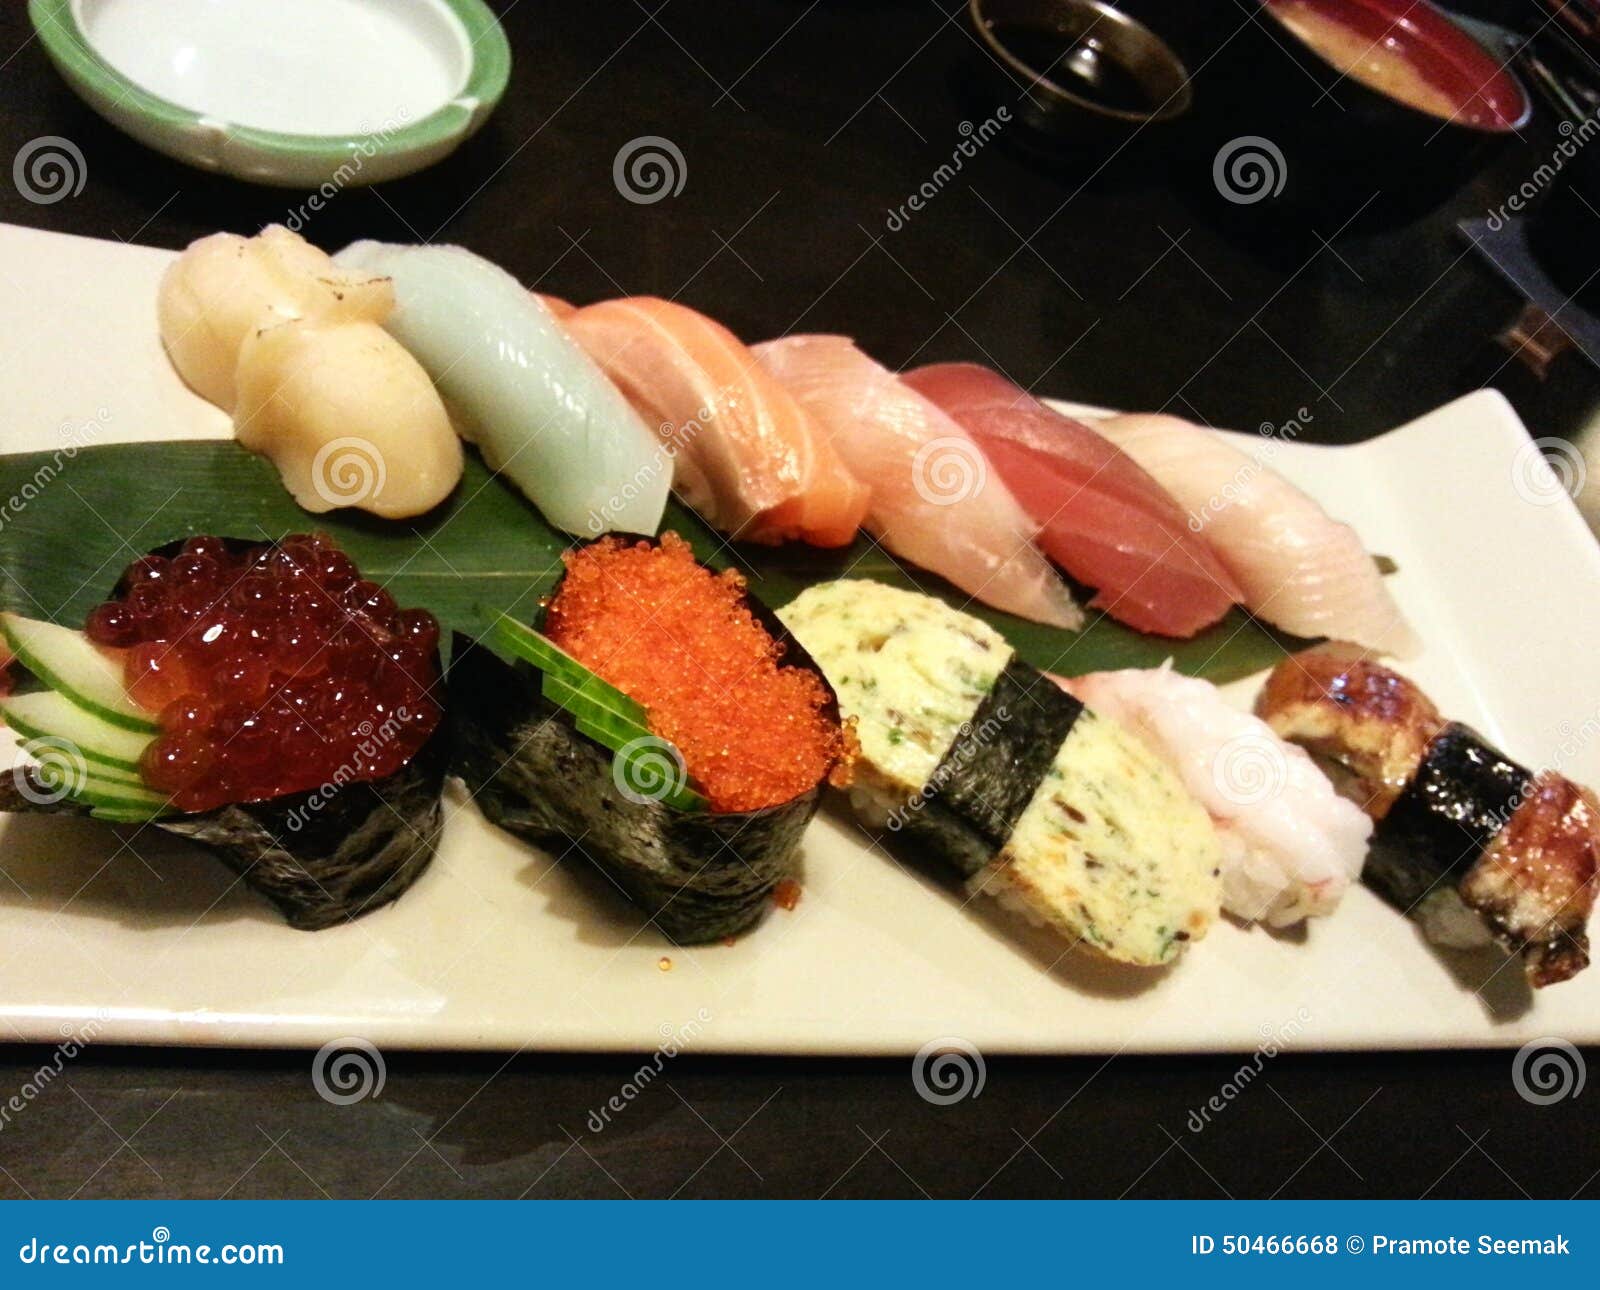 Mixed Sushi On The Dish Japanese Food Japan Stock Photo Image Of Japanese Food 50466668,Giant Octopus Cooking